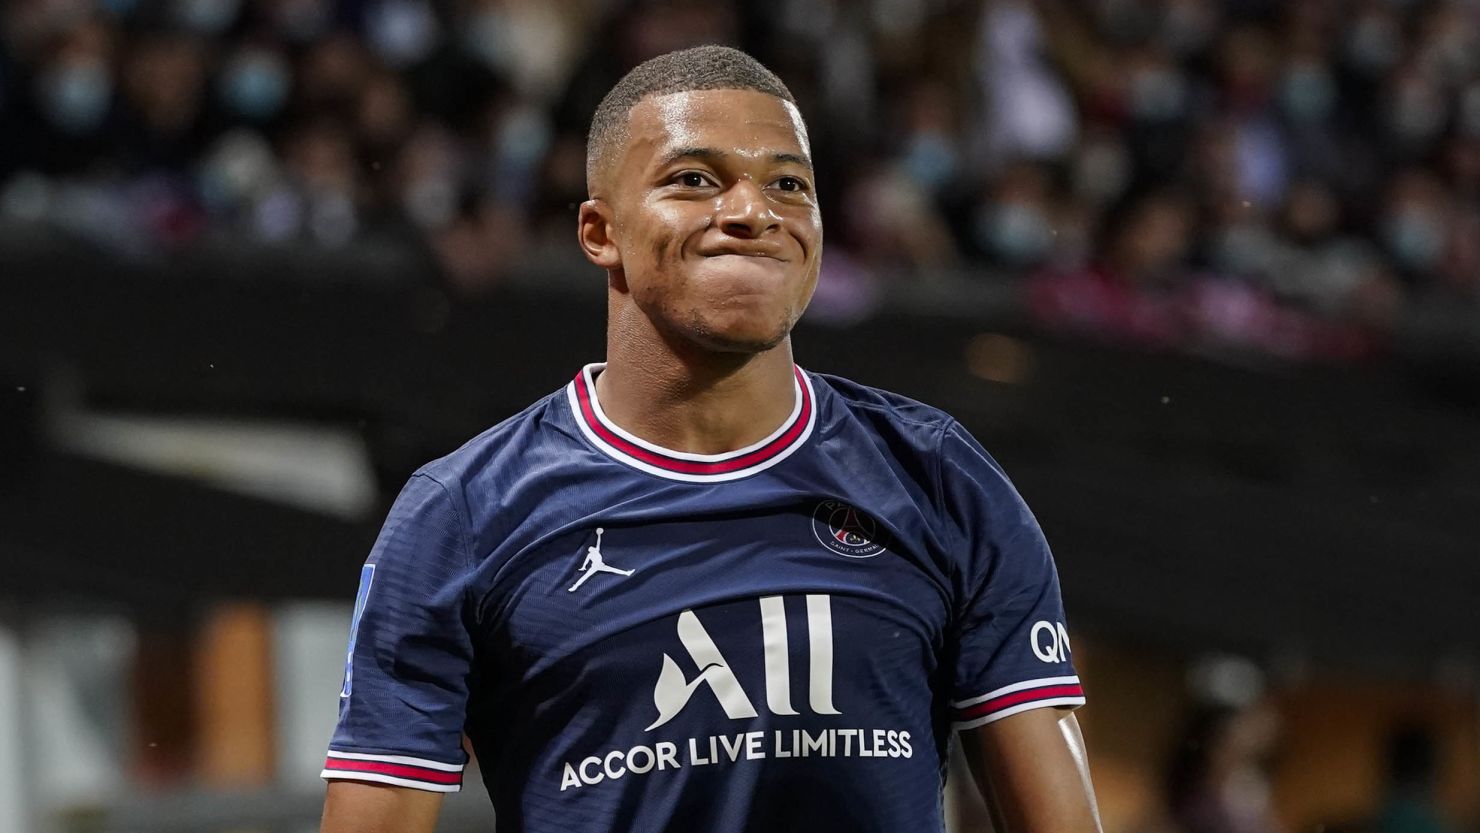 PSG Star Kylian Mbappe Is Now the World's Most Valuable Soccer